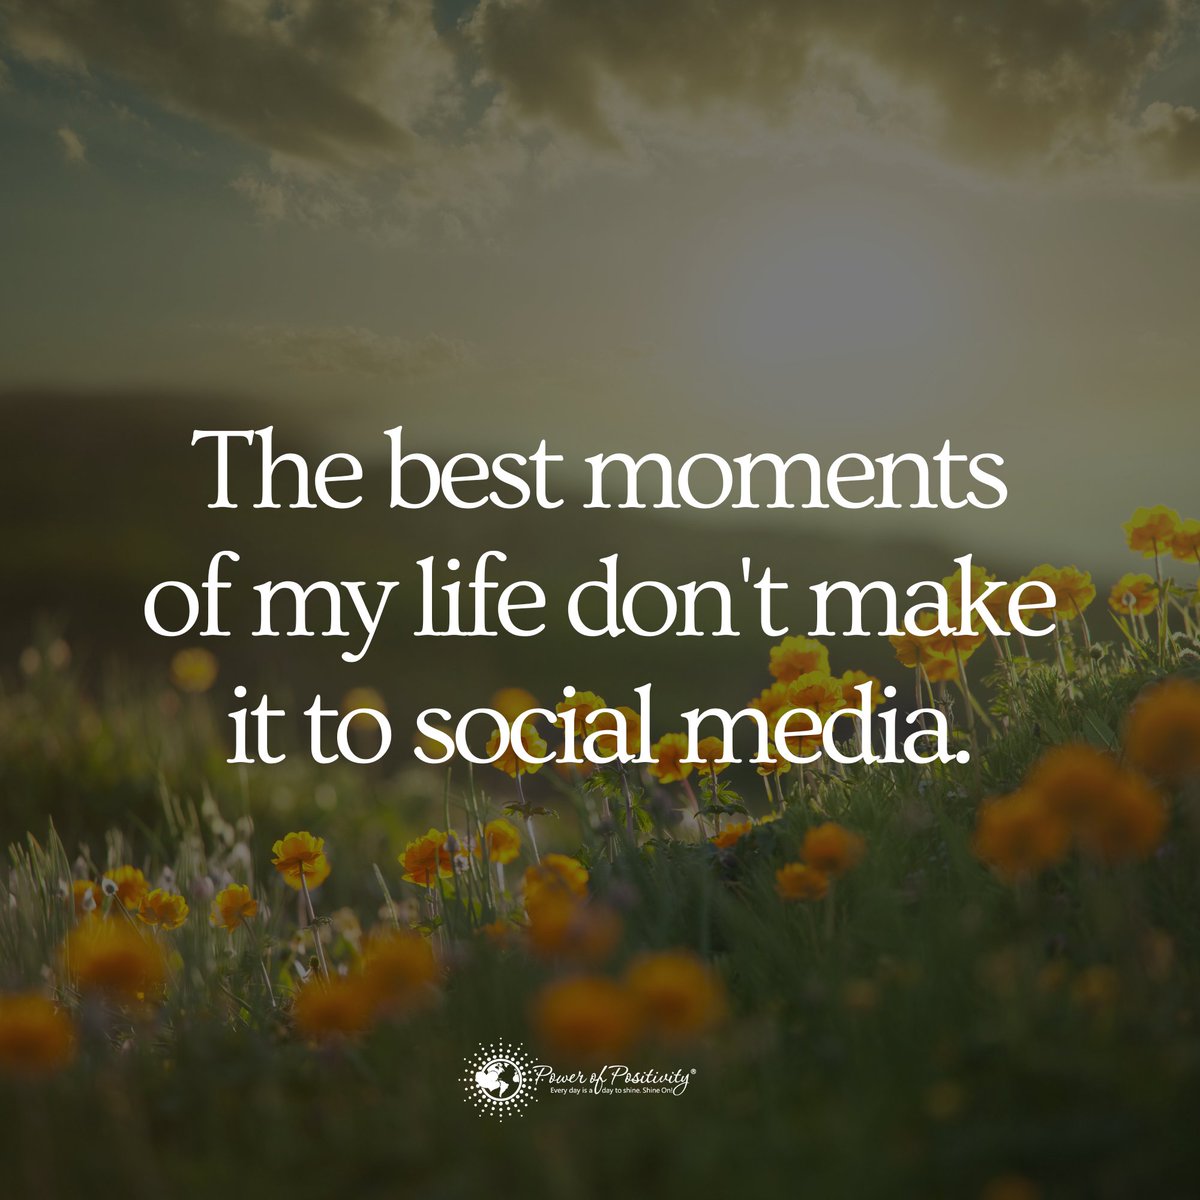 The best moments of my life don't make it to social media.